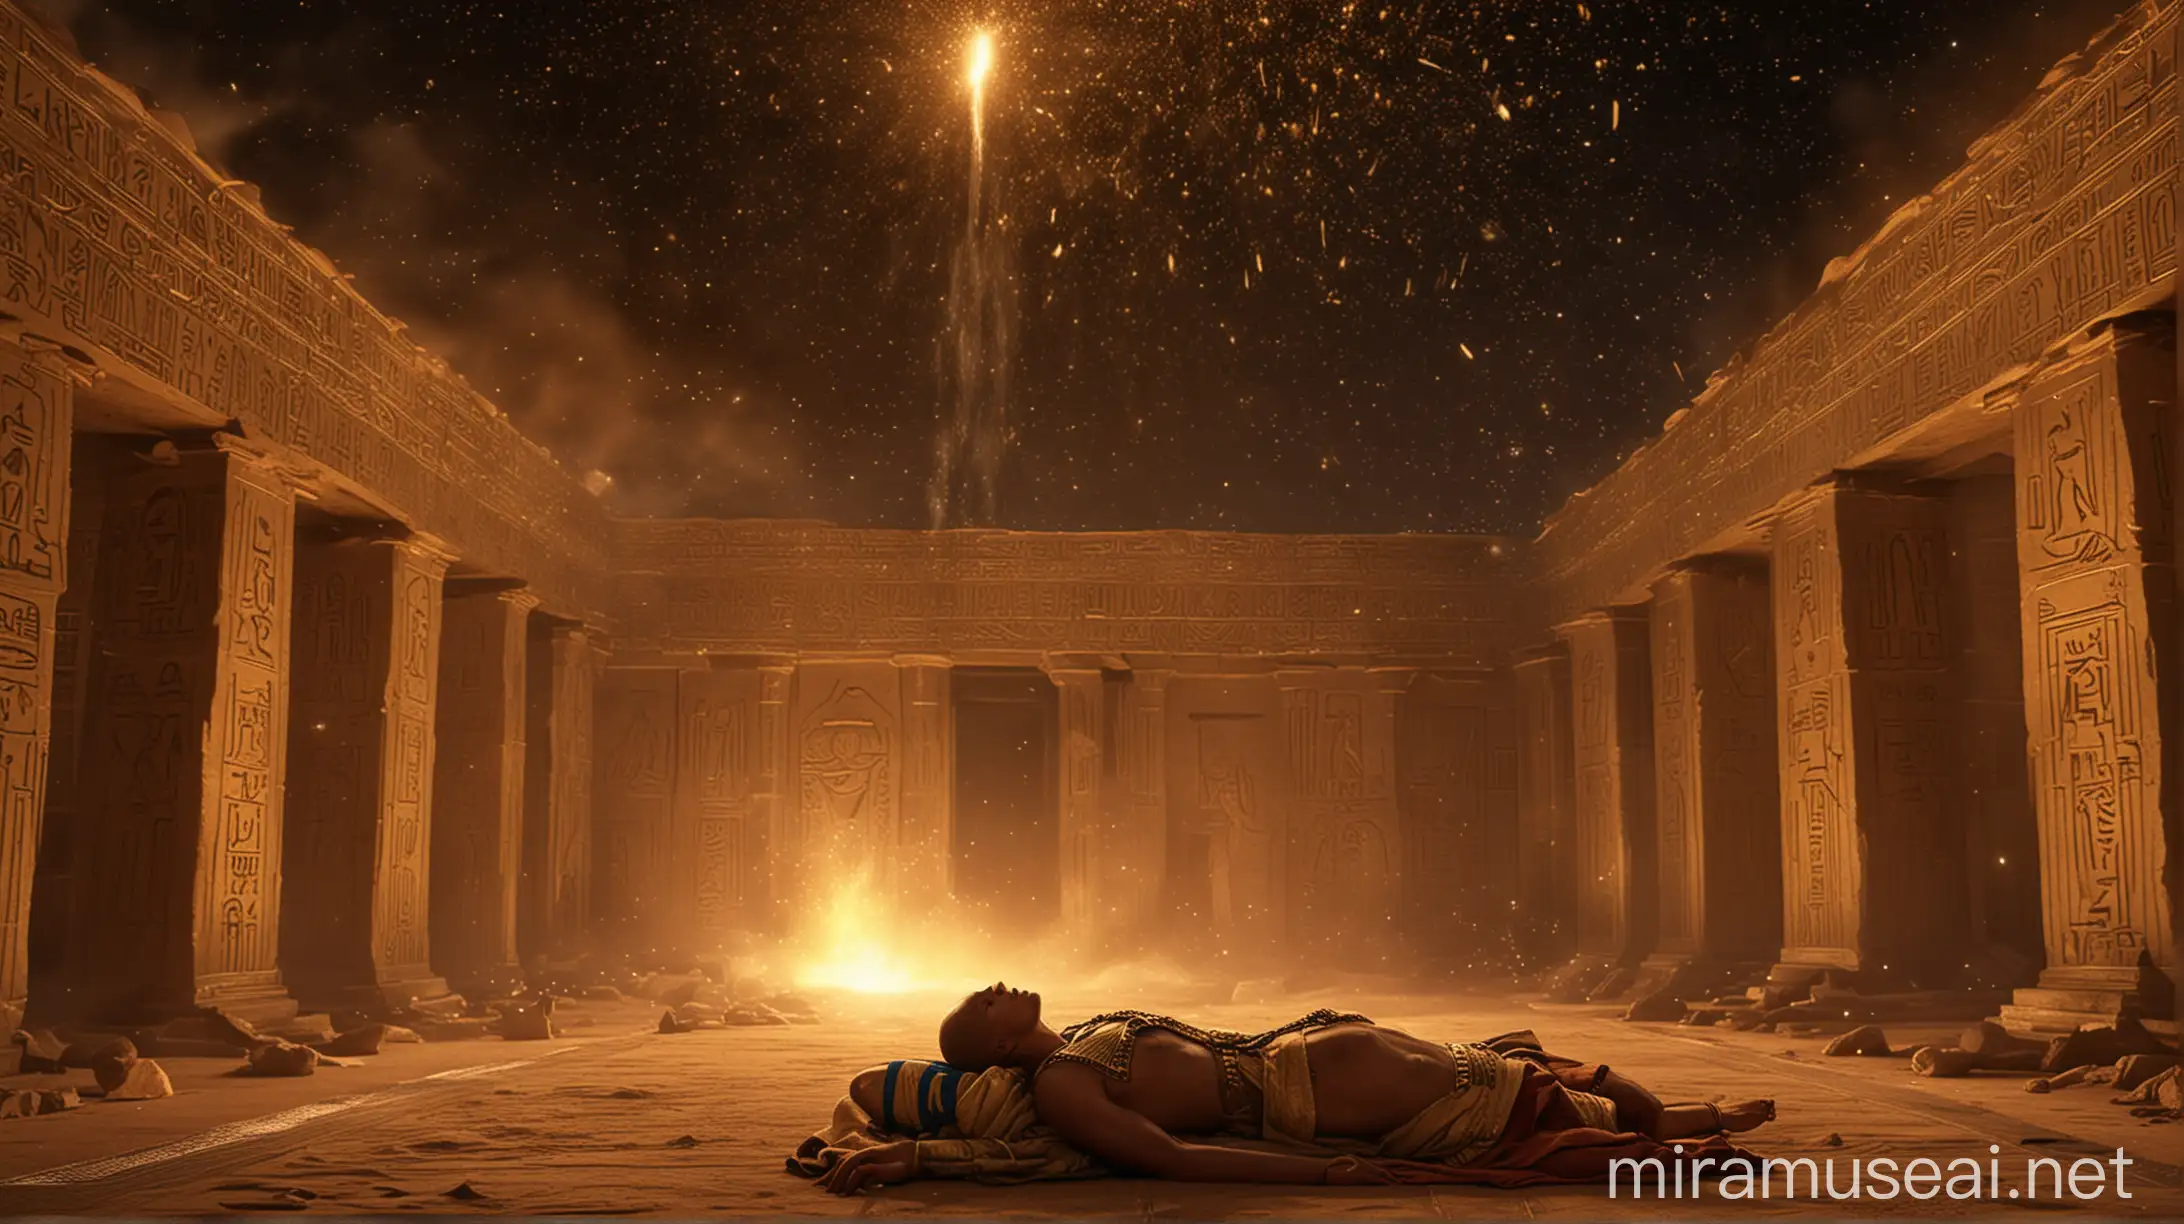 Pharaoh's Dream:

Description: Pharaoh is sleeping in a lavish, ancient Egyptian palace. Above him, a vivid dream sequence shows a star falling from the sky towards the palace, setting it ablaze.